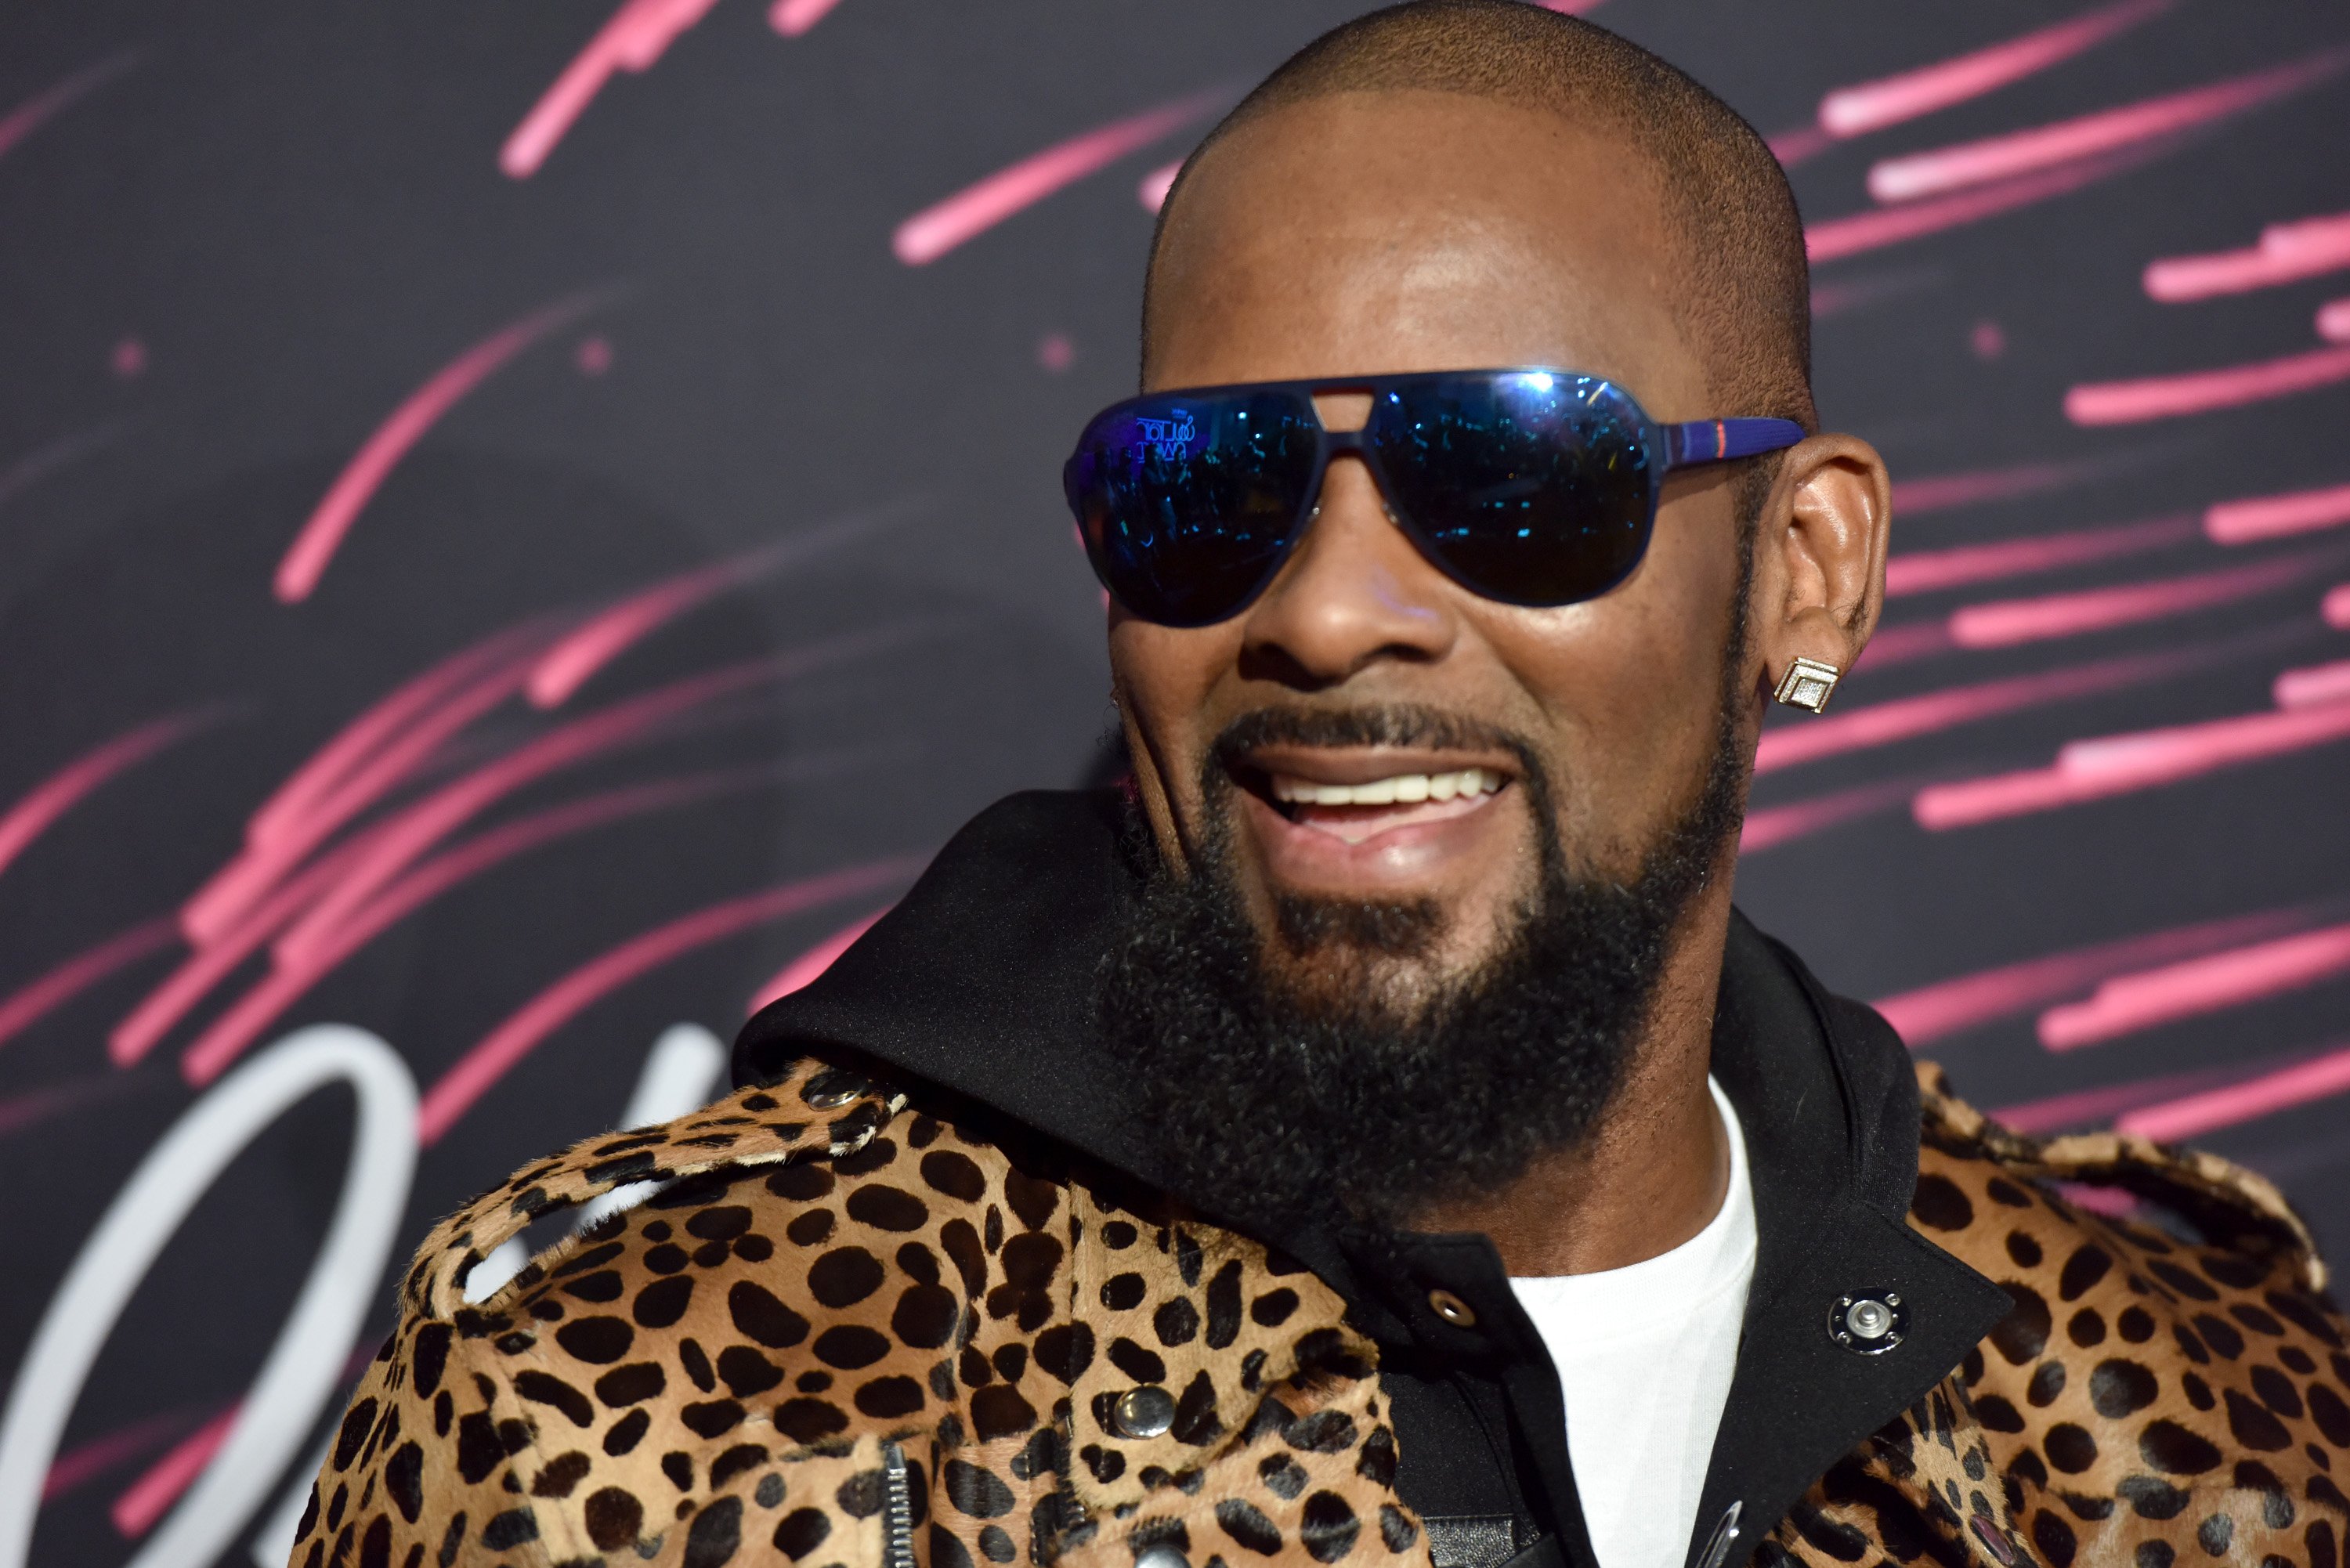 R. Kelly at the 2015 Soul Train Music Awards in Las Vegas, Nevada. | Source: Getty Images